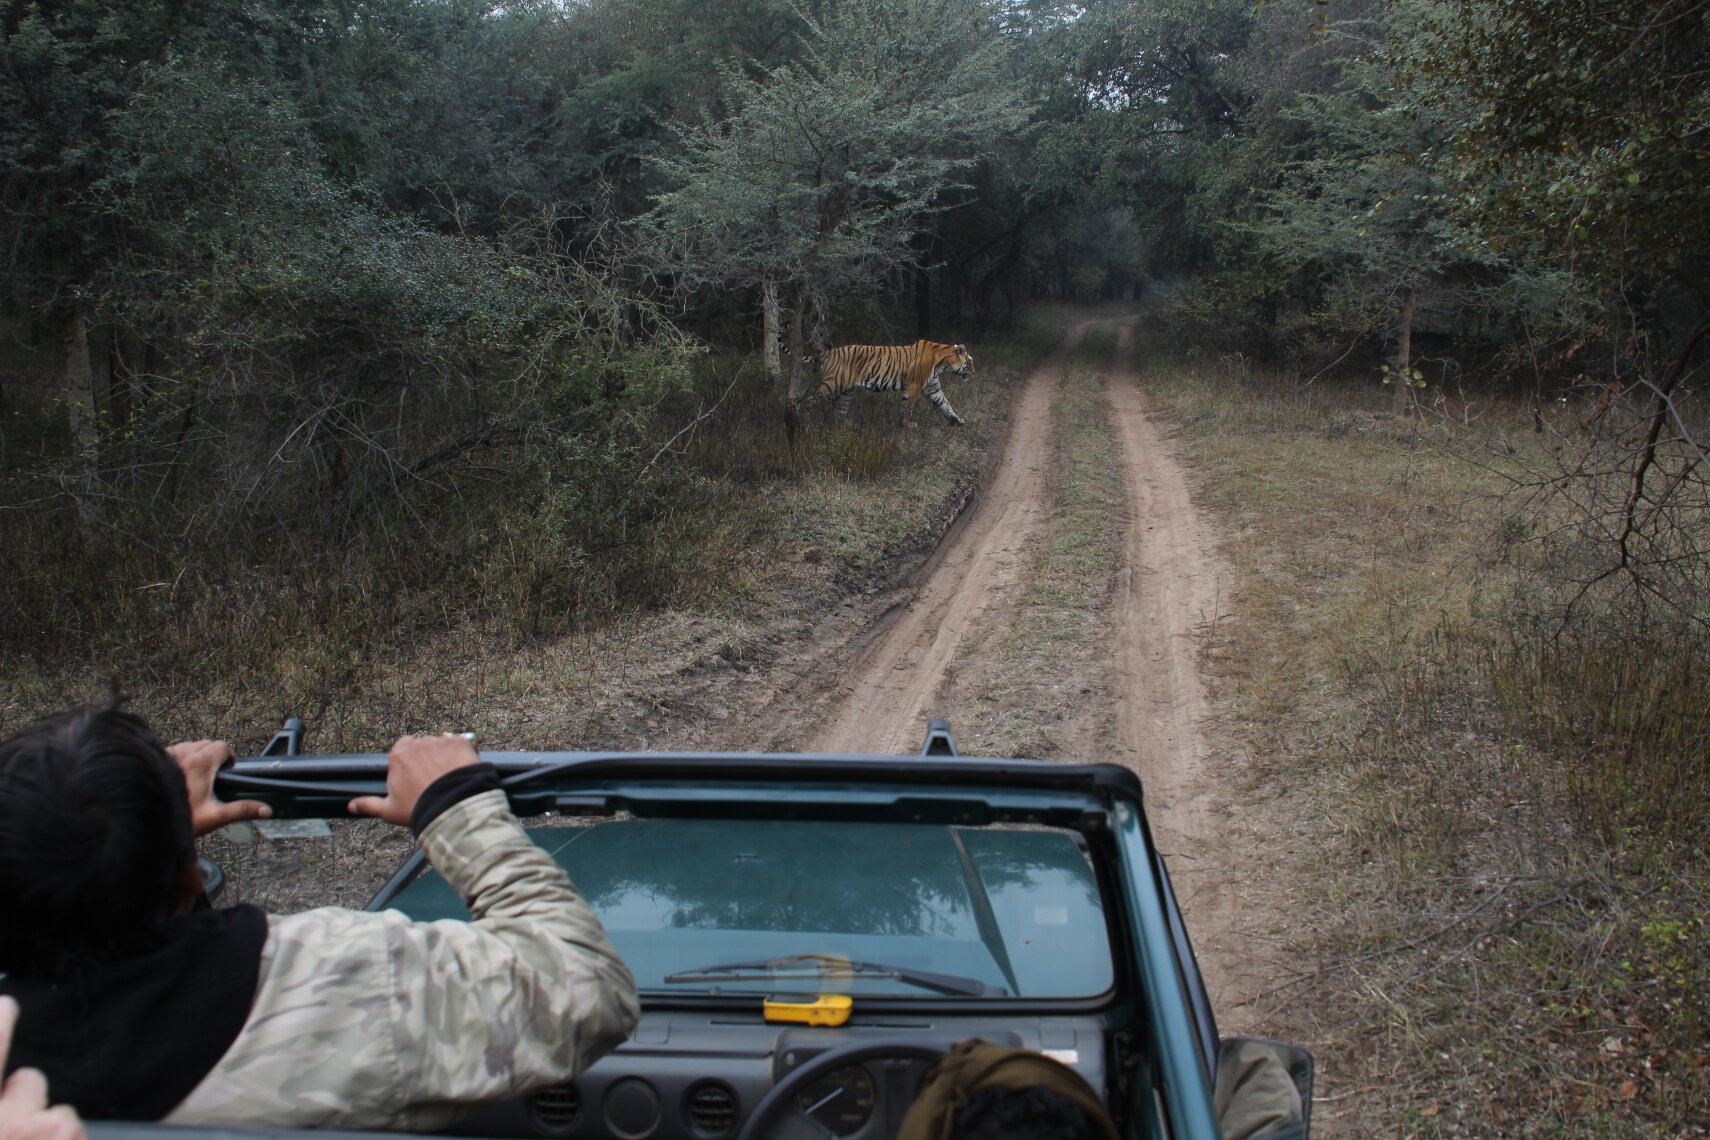 Tiger T17 crosses a road in front of a Gypsy in Ranthambore, India.